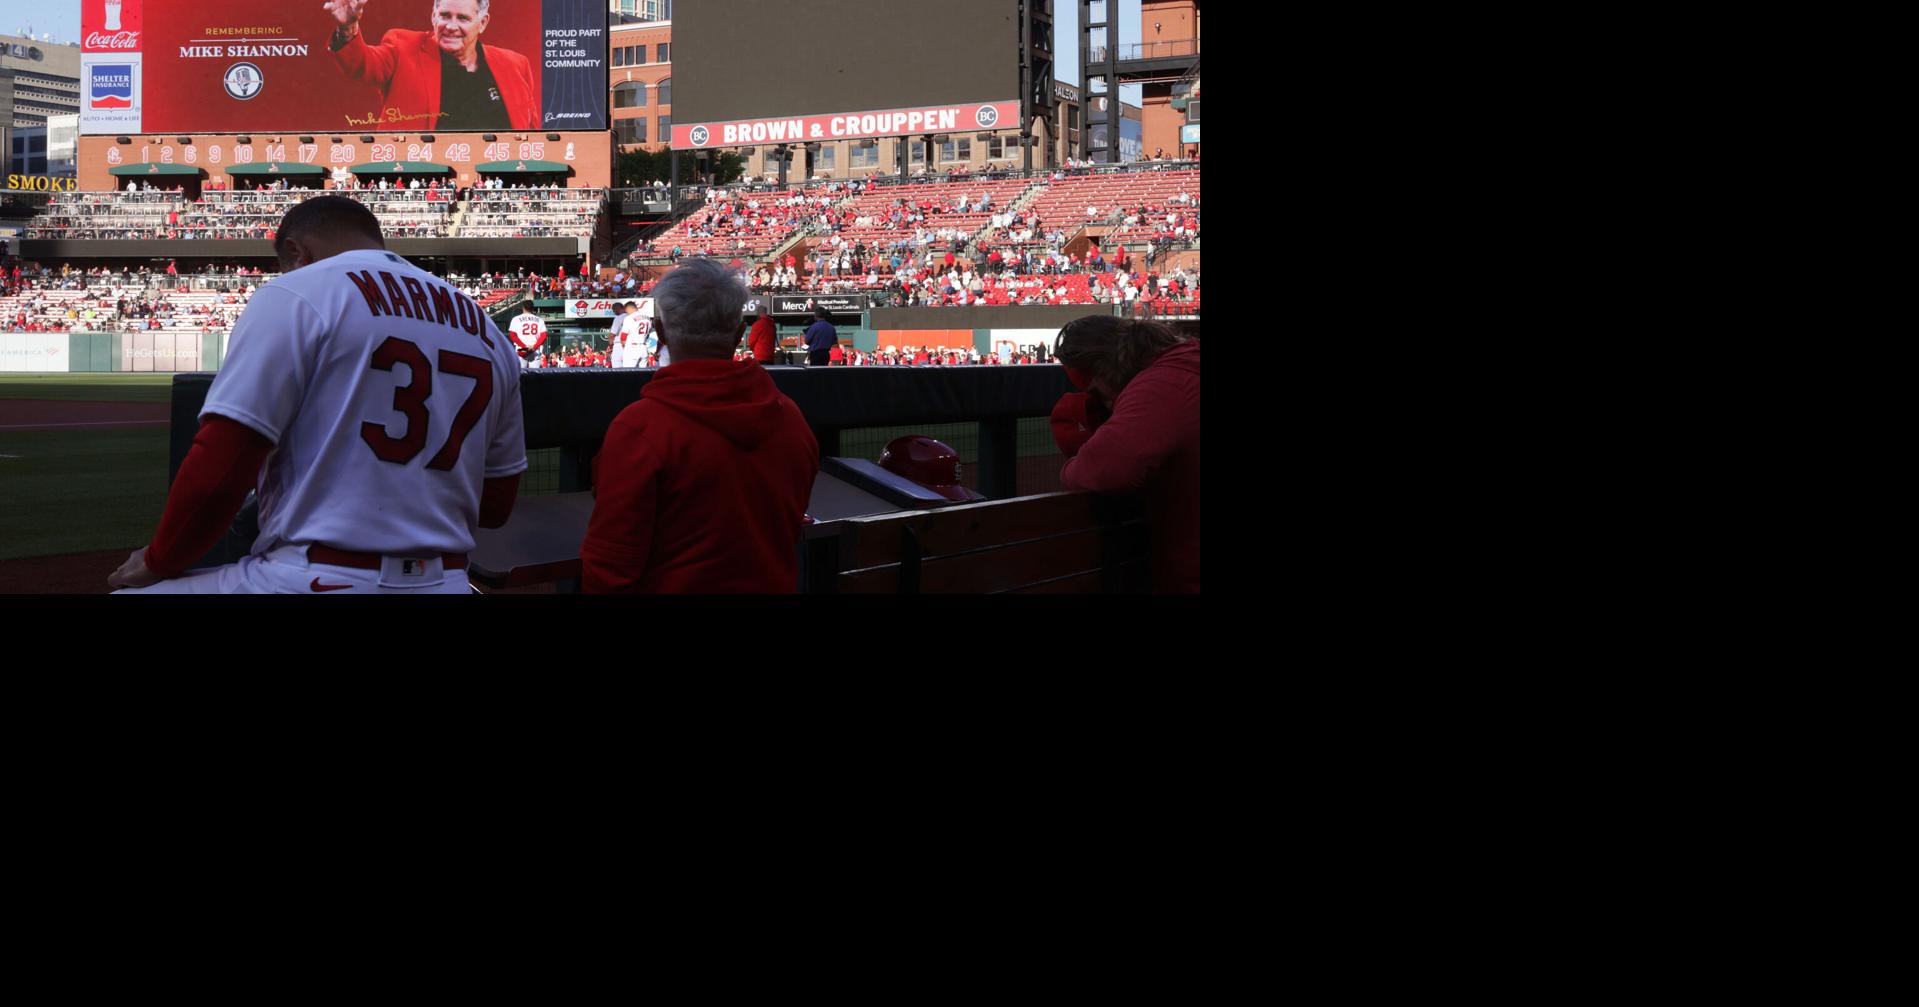 Cardinals honor Mike Shannon and Tim McCarver, who shared bonds on and off  the field